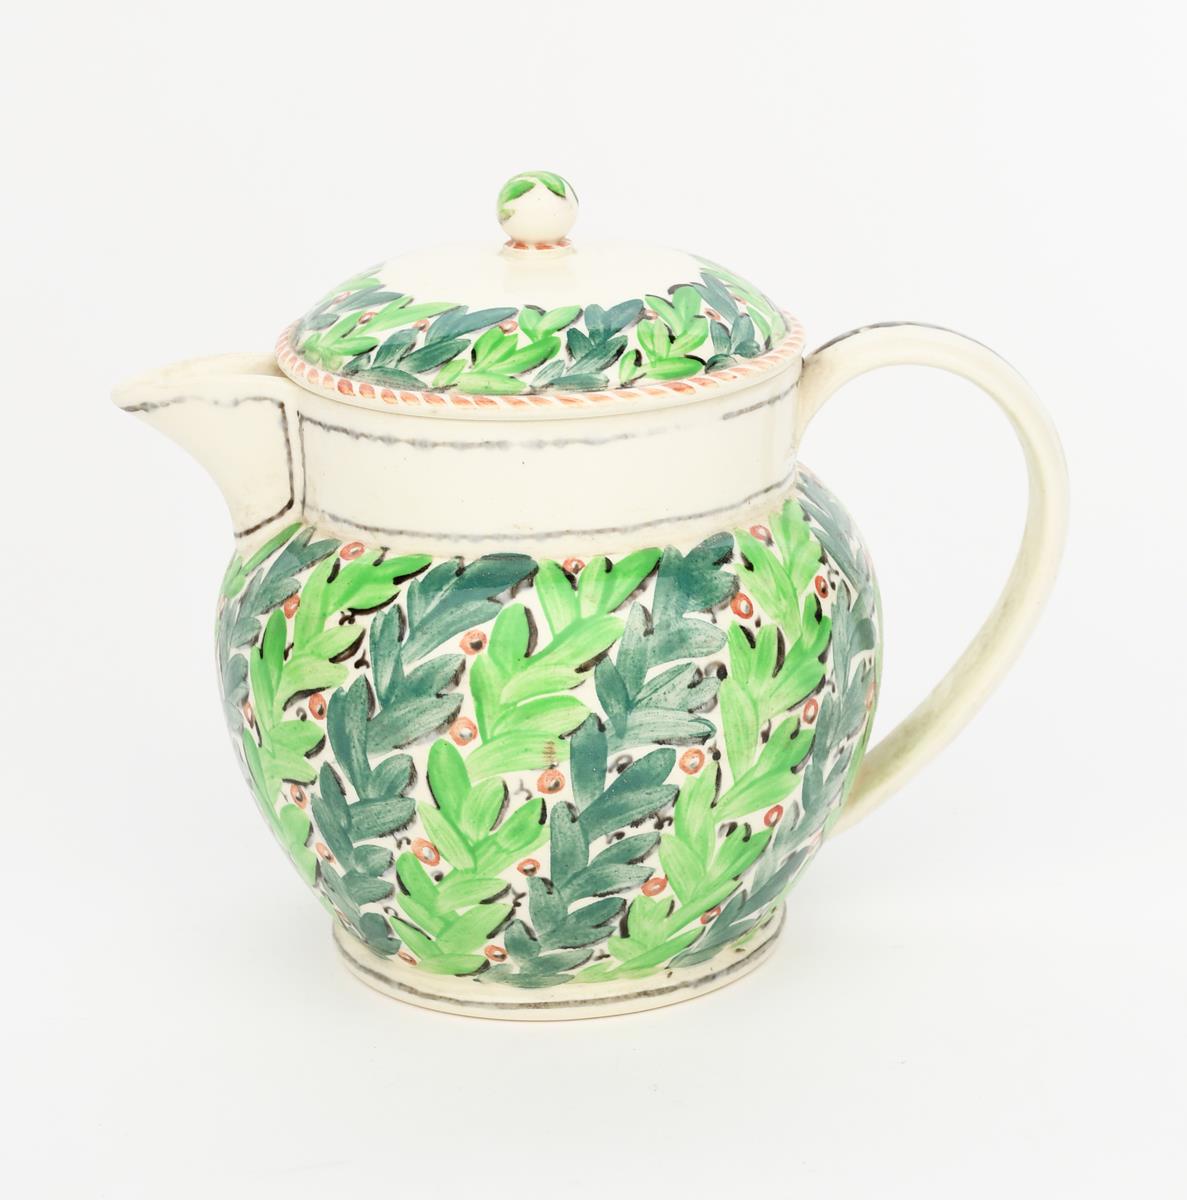 A Wedgwood jug and cover painted by Louise Powell, model no.4036, shouldered, ovoid form, painted